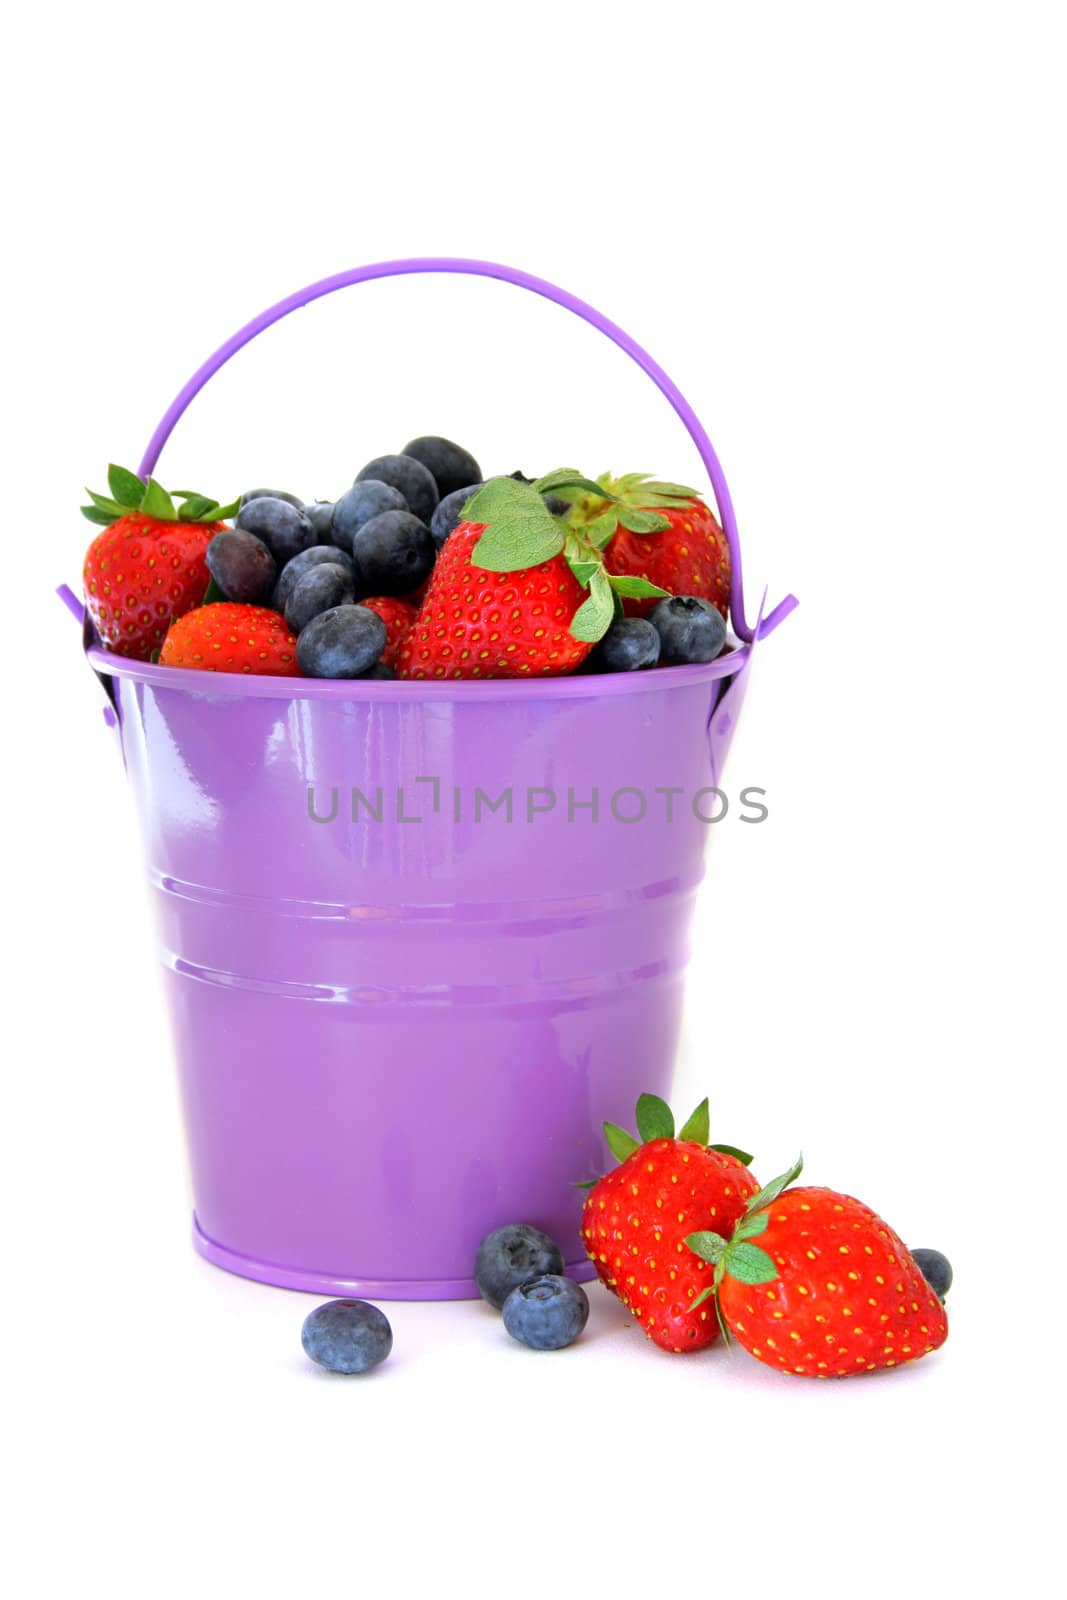 A purple bucket full of blueberries and strawberries spilling over. All isolated on a white background.